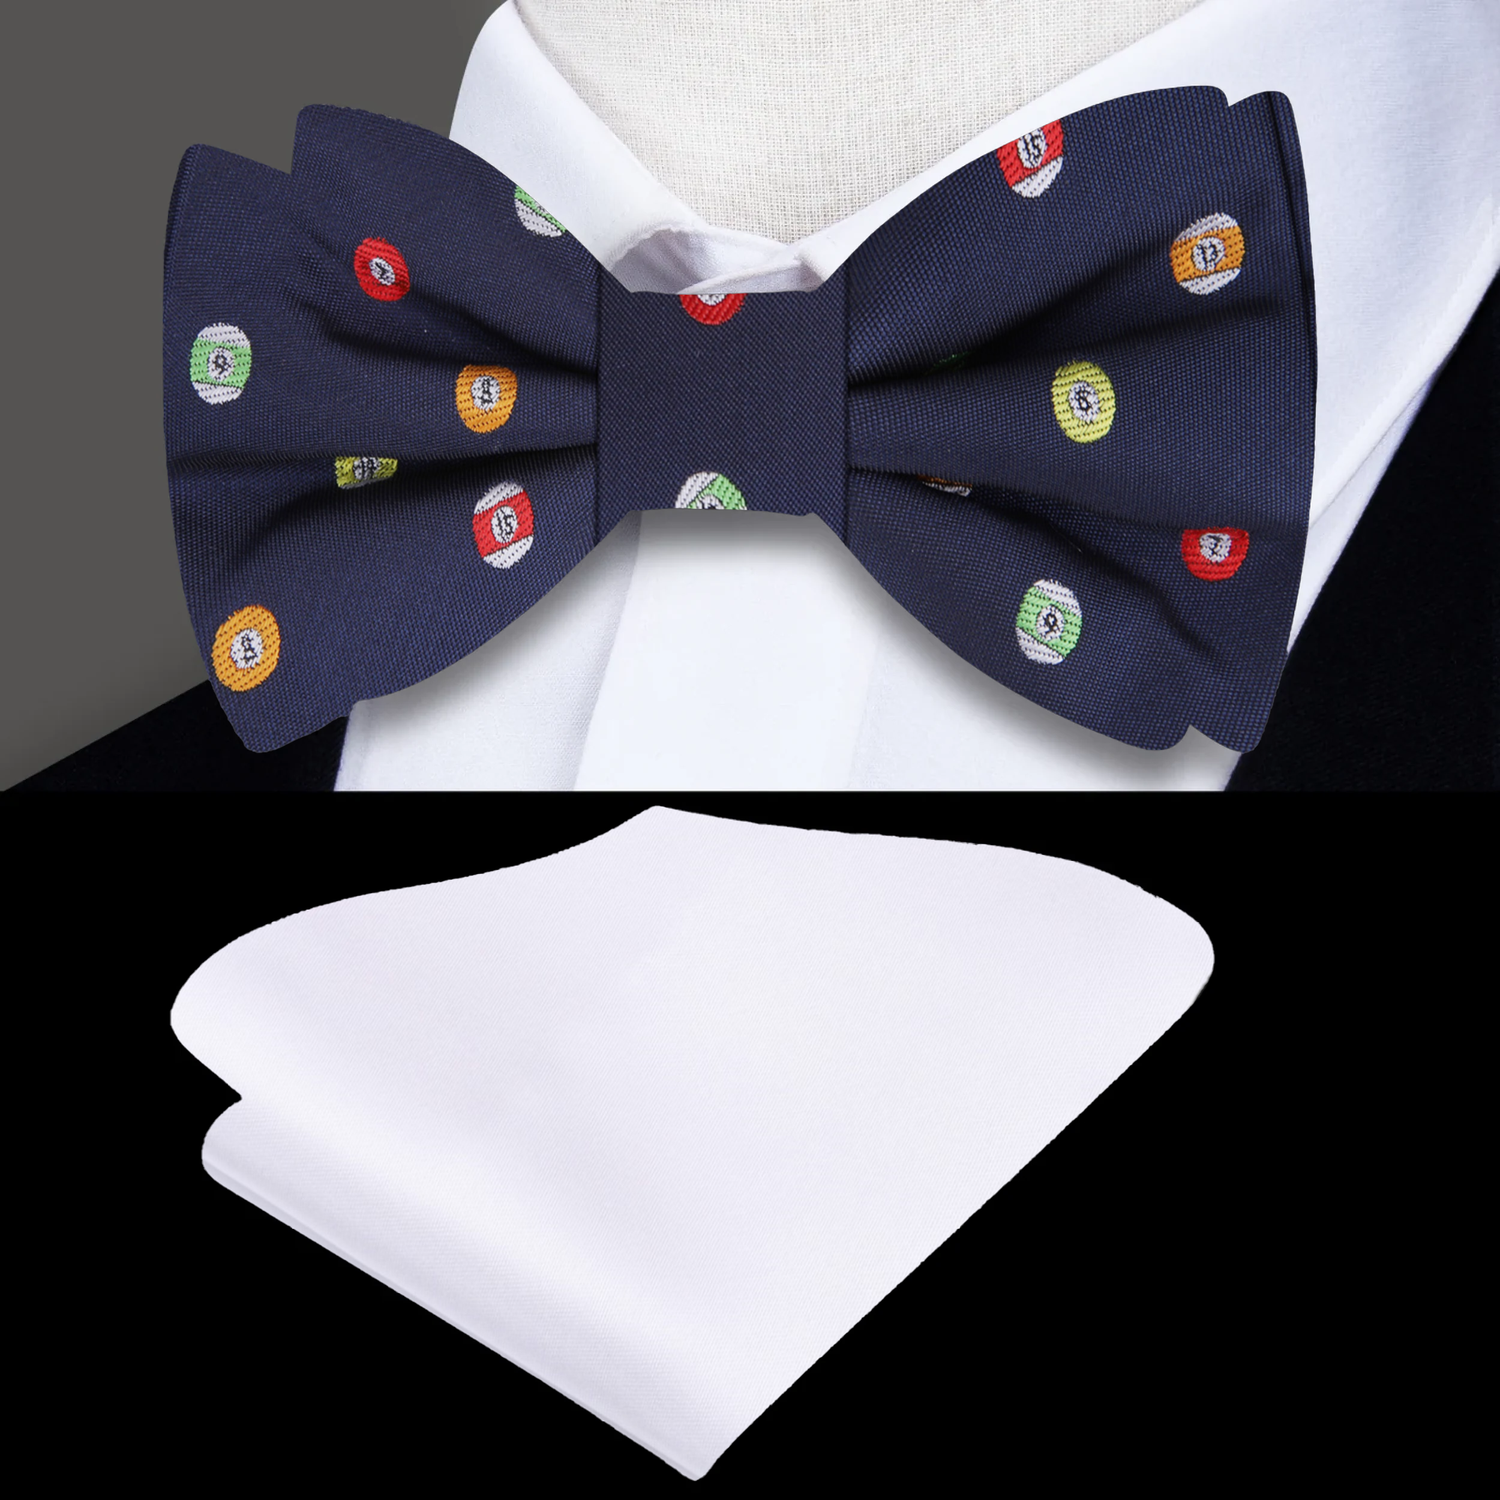 Blue with Multiple Colored Billiard Balls Bow Tie and White Pocket Square